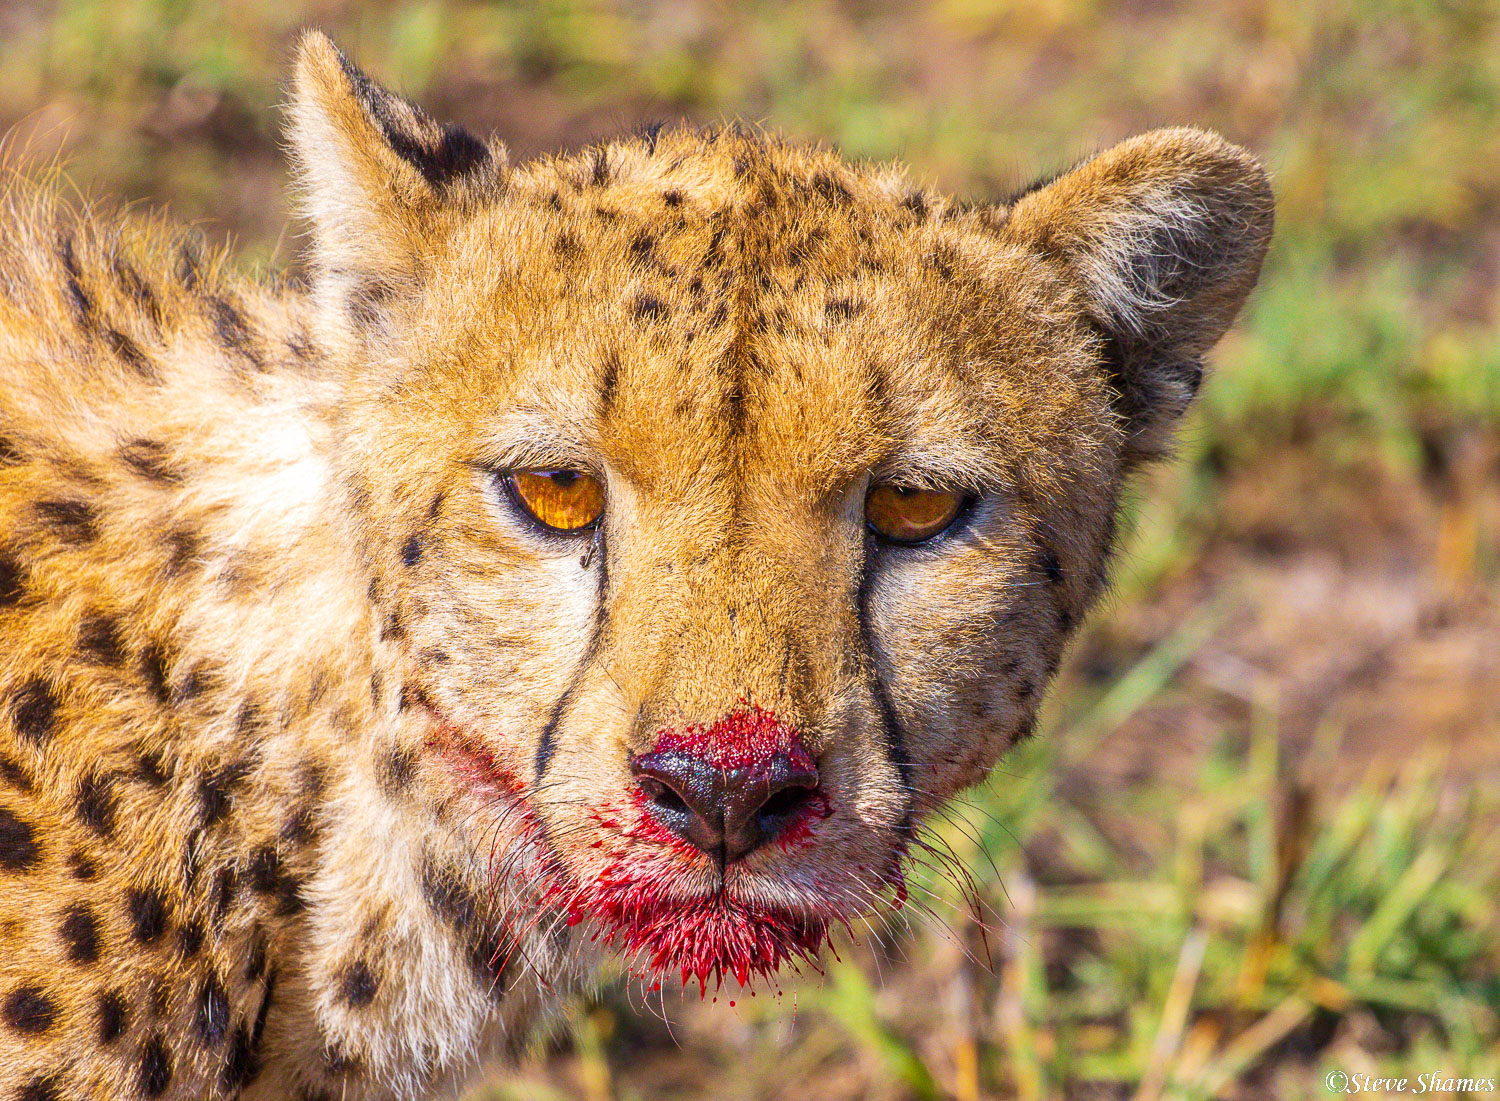 Bloody faced cheetah taking a break from a gazelle meal.